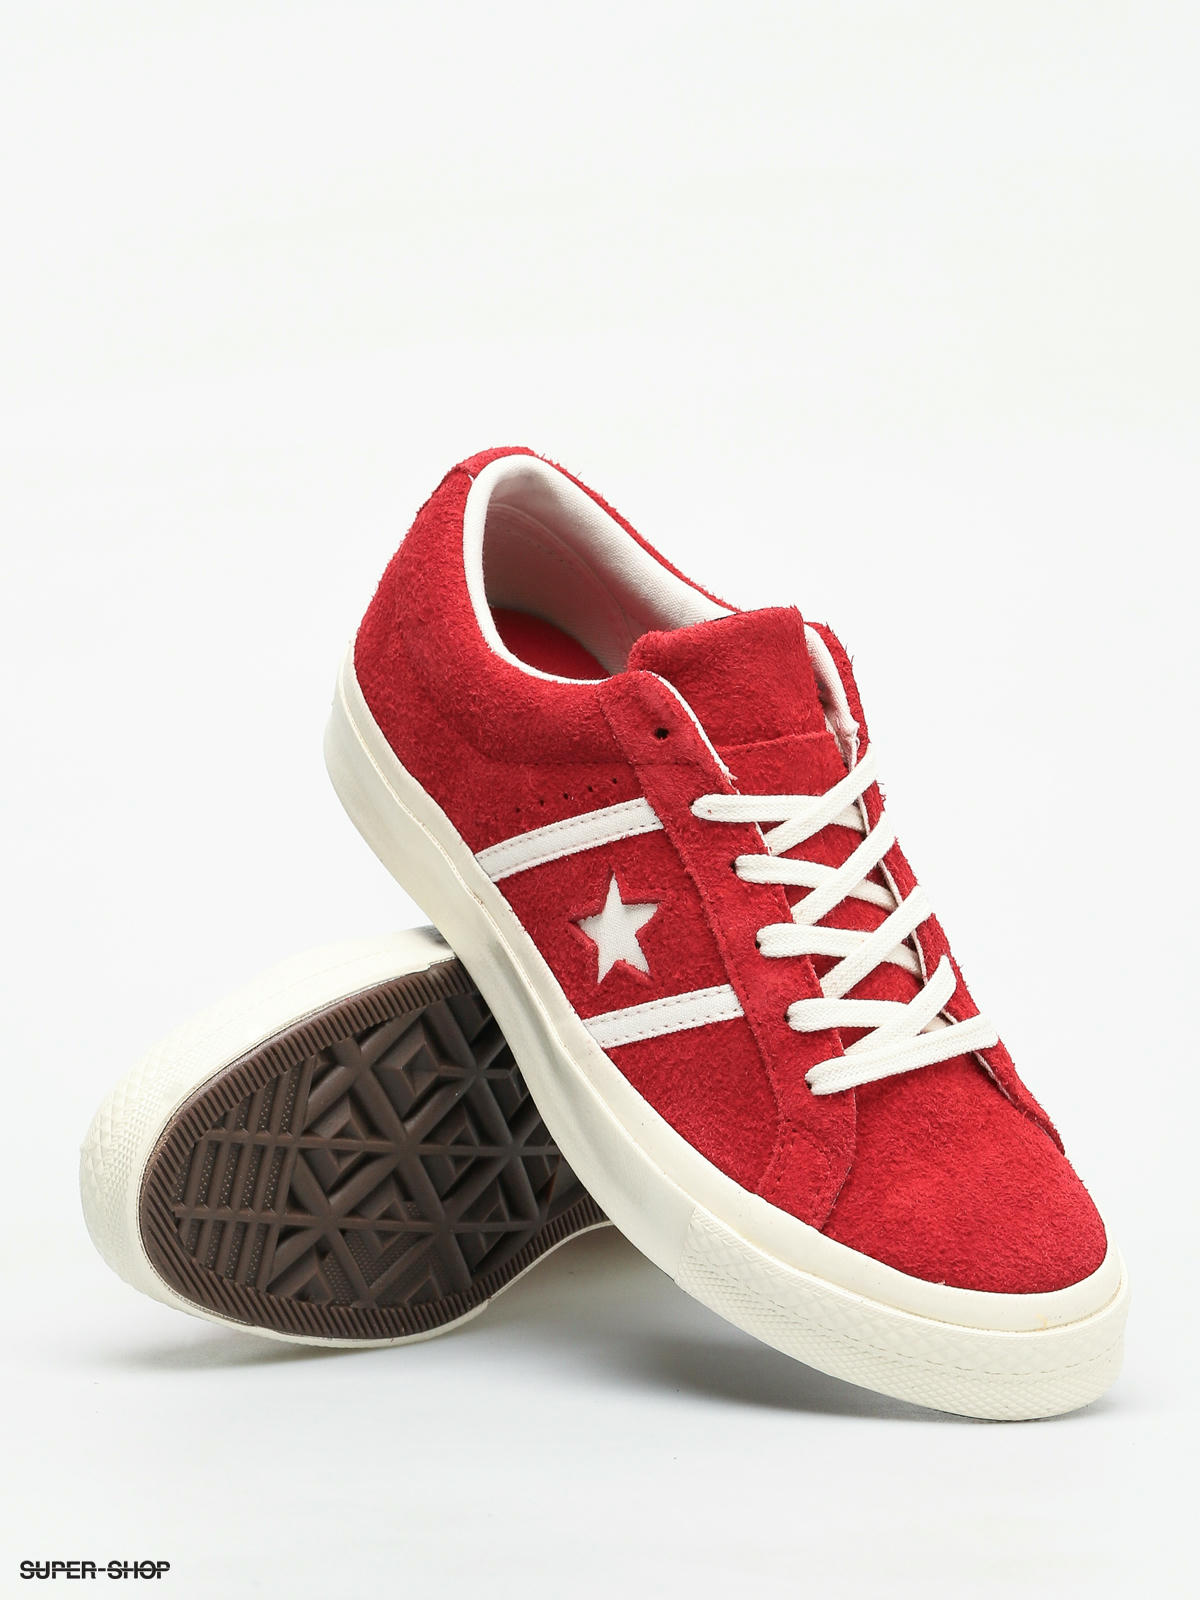 red converse star